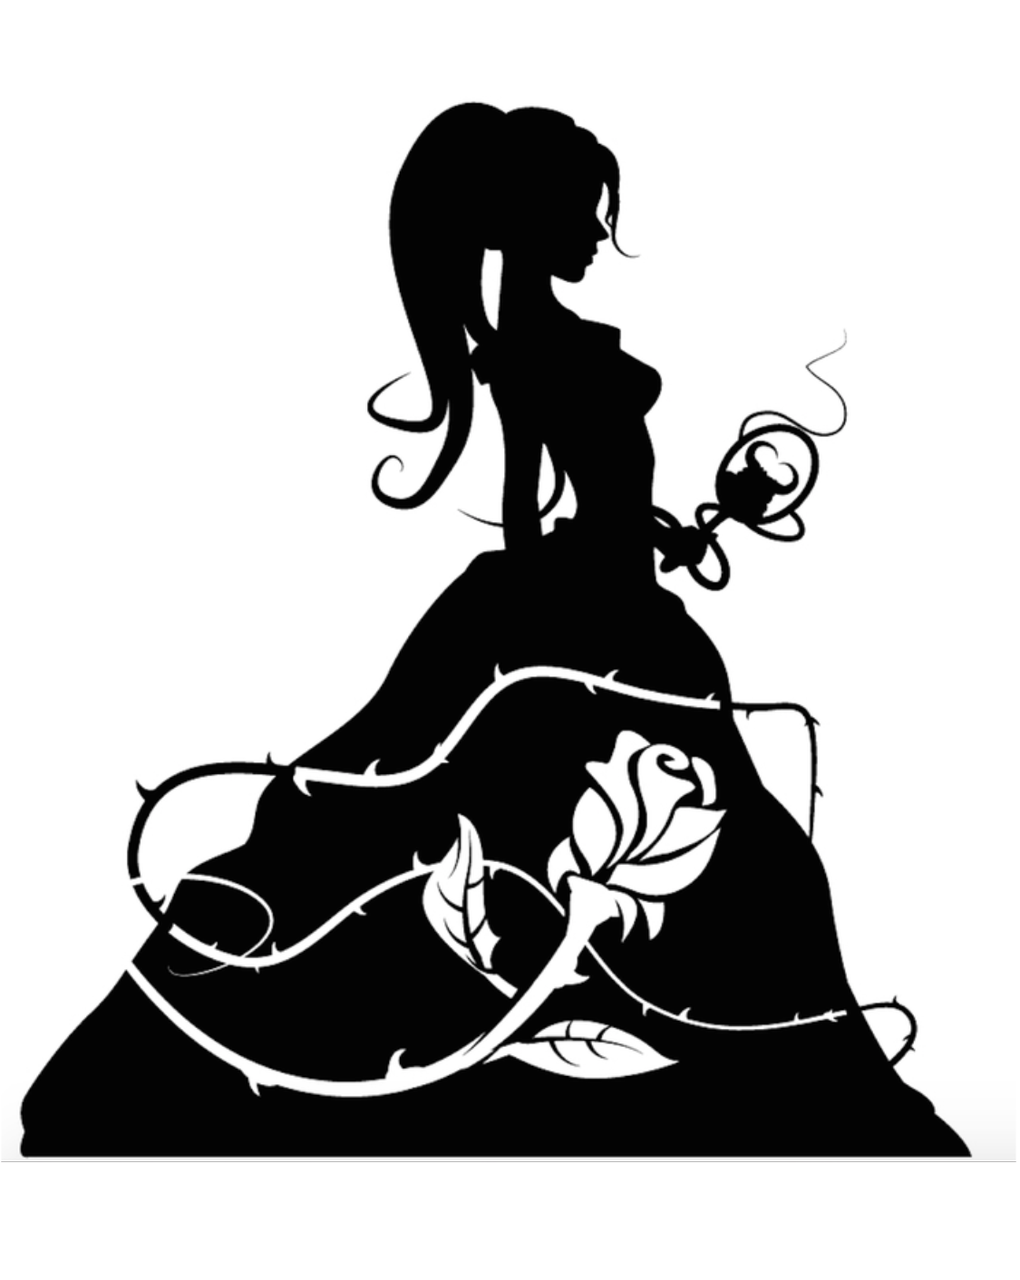 belle clipart black and white